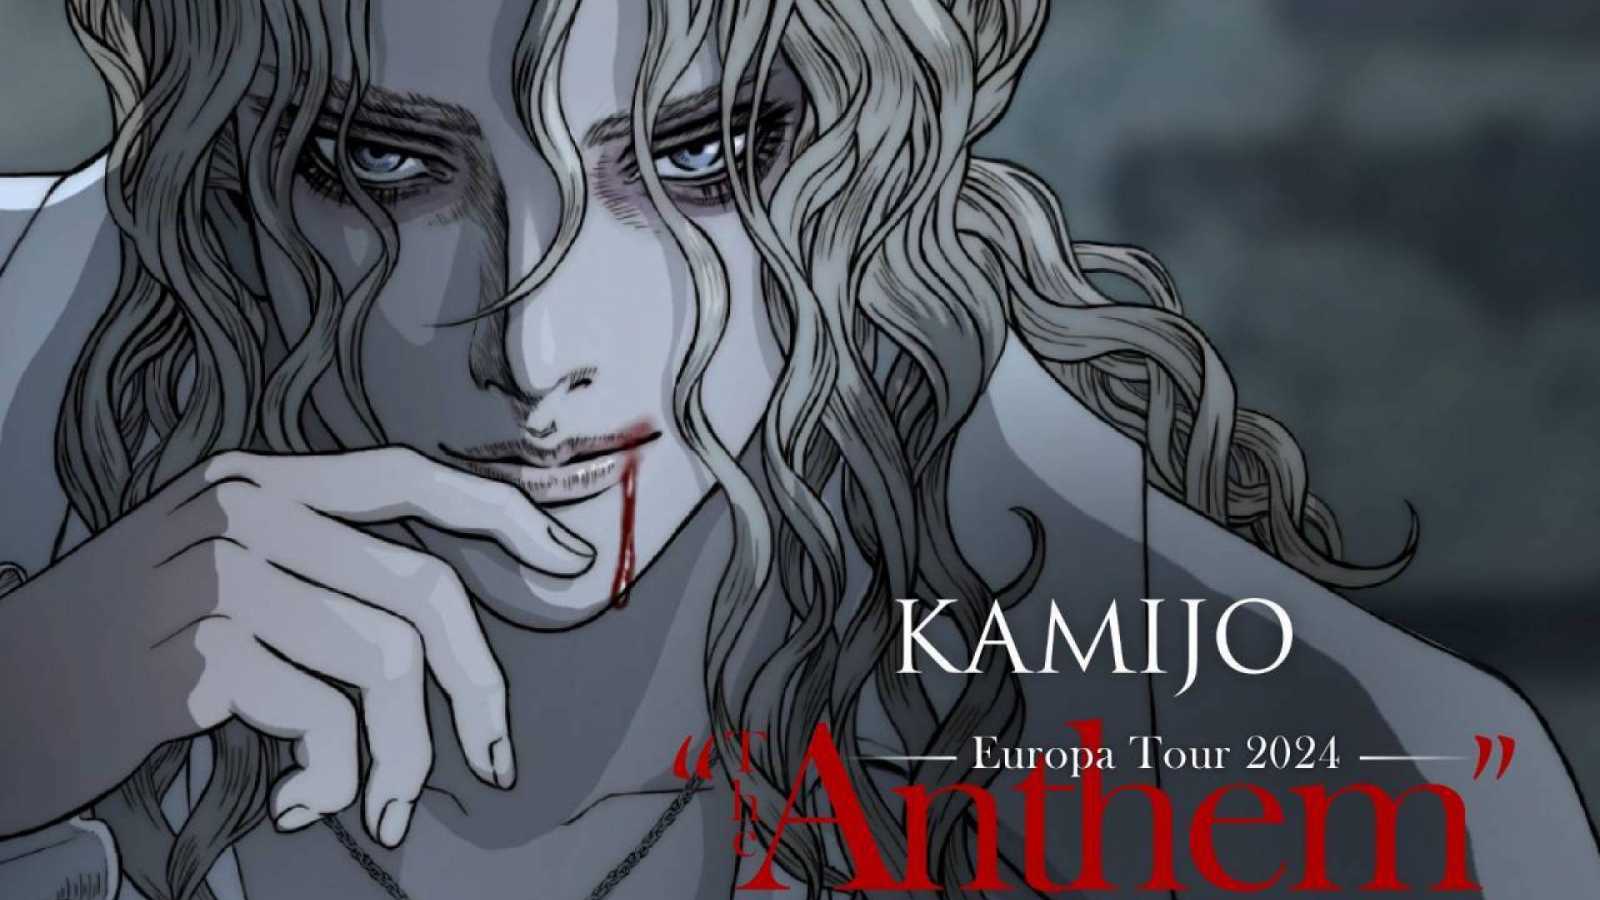 KAMIJO to Tour Europe © KAMIJO. All rights reserved.